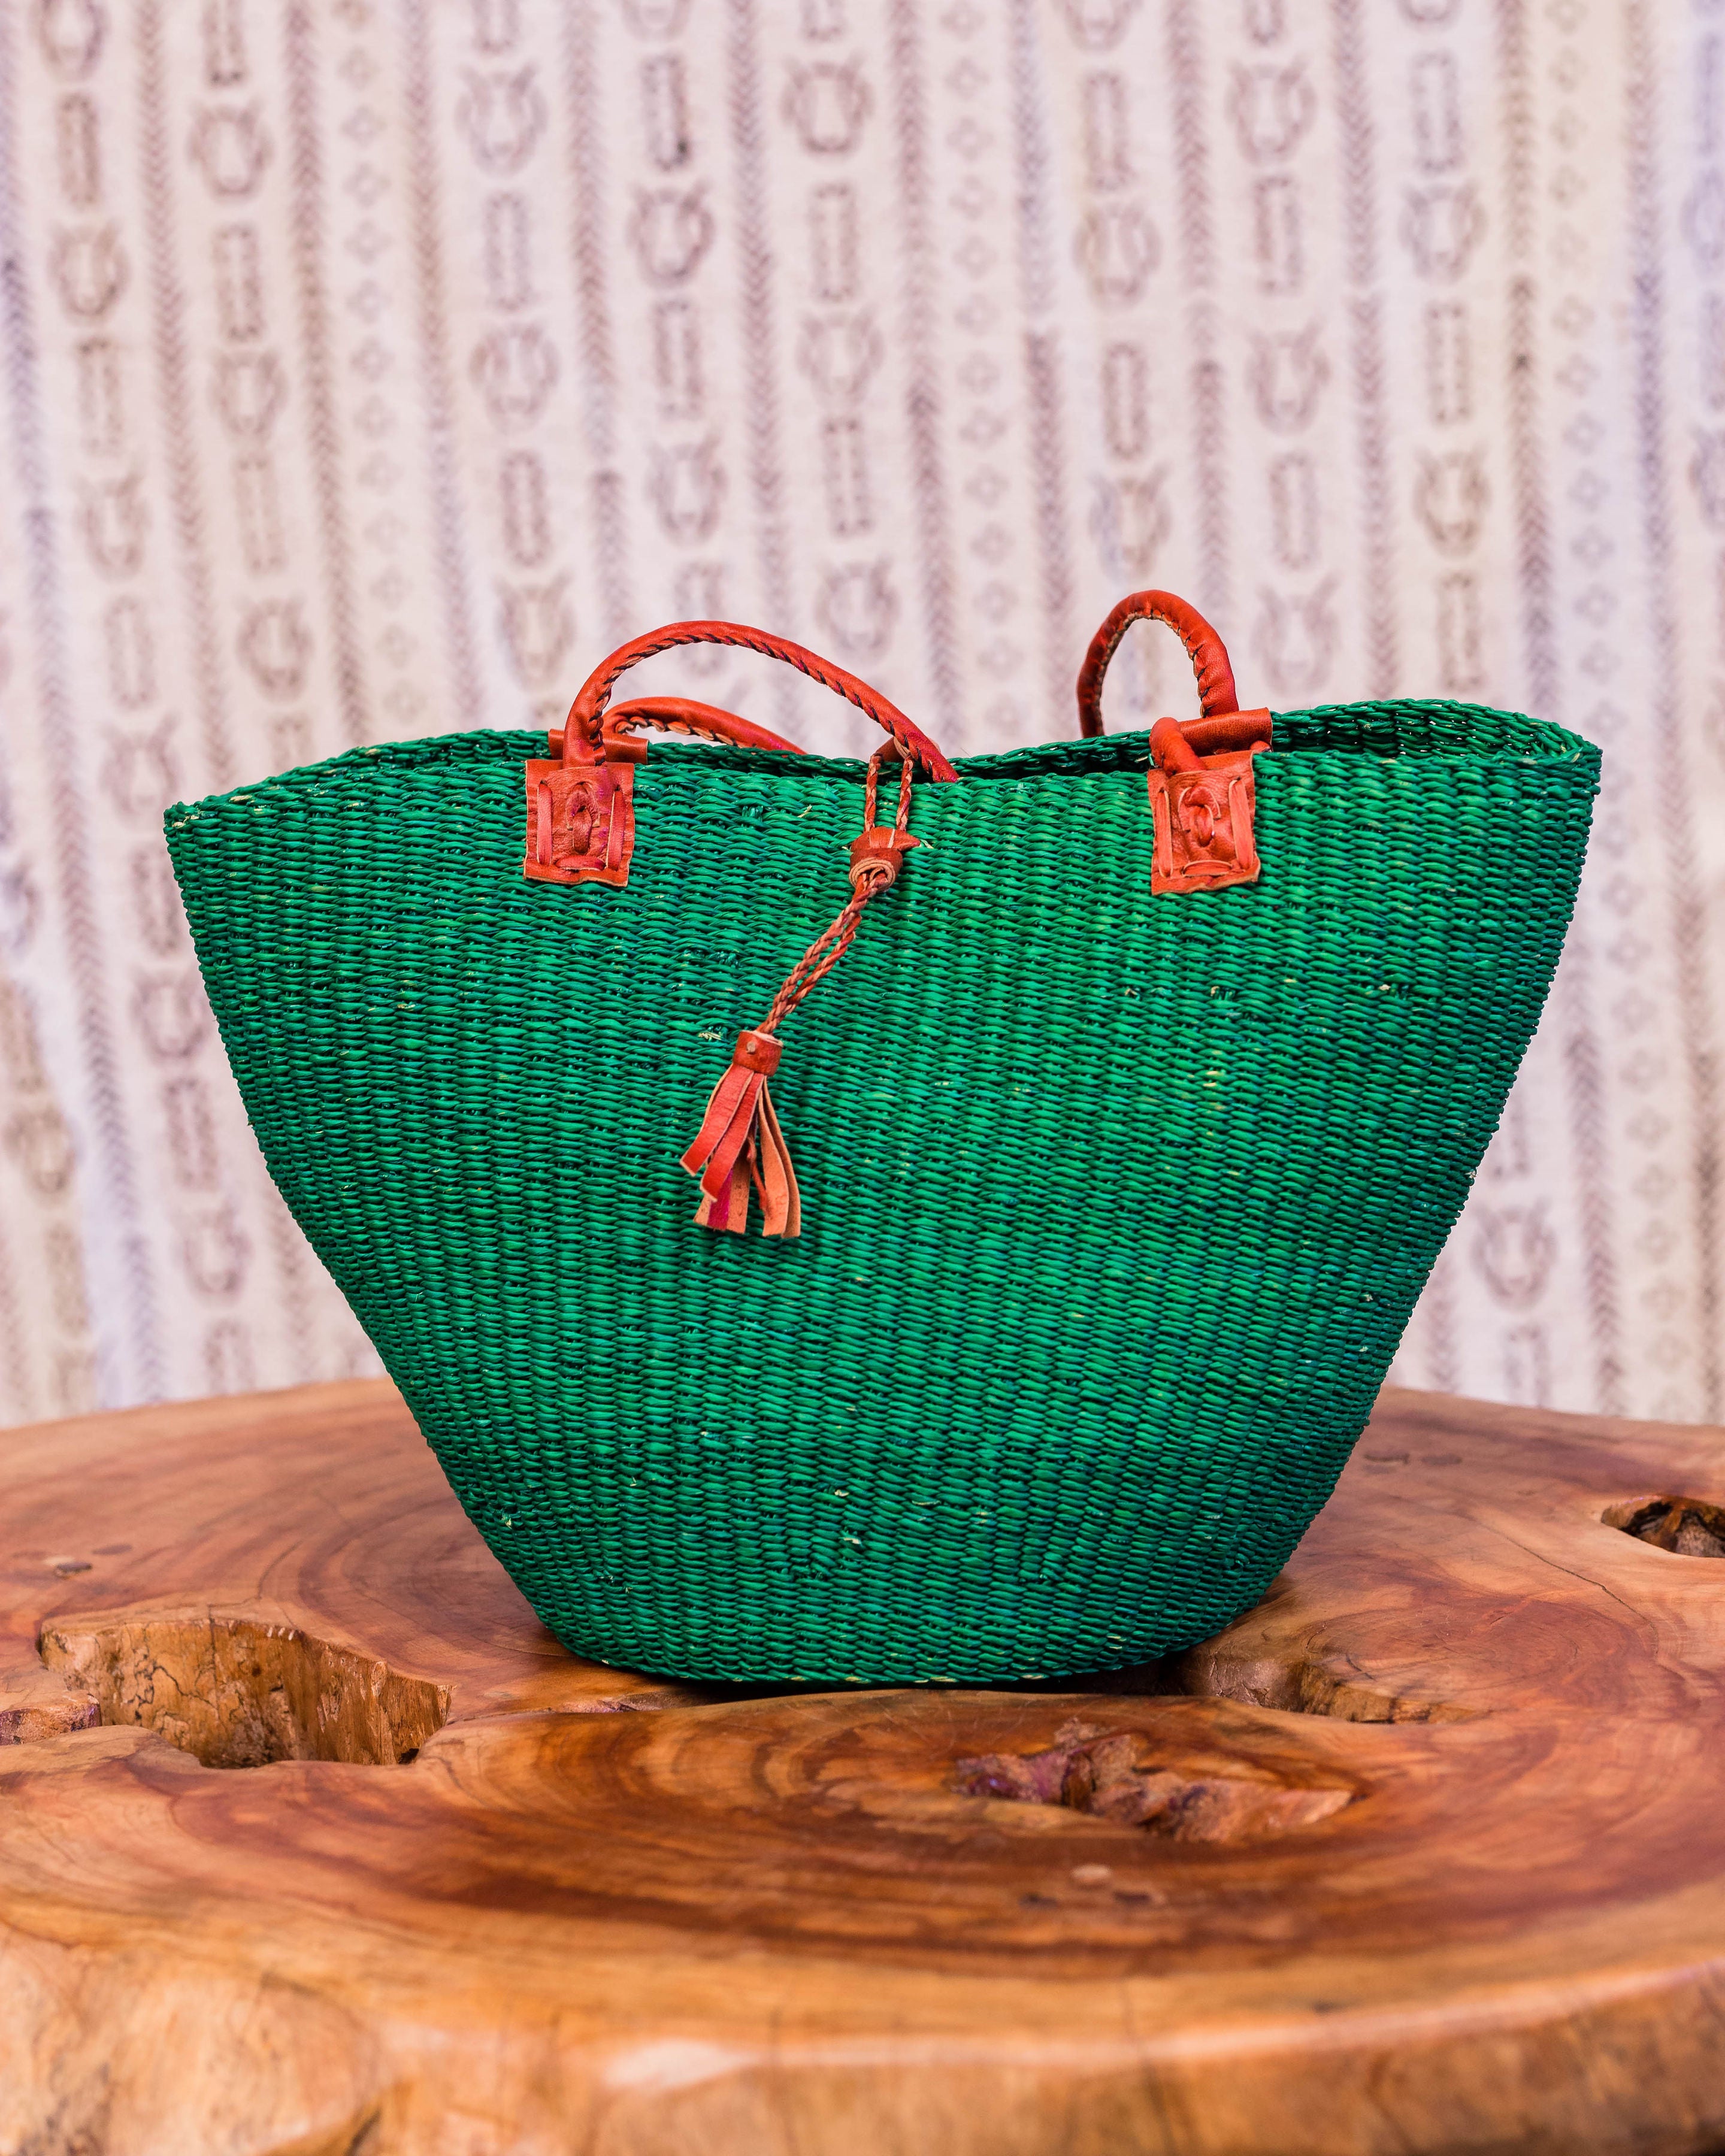 Moroccan Straw Bag With Leather Handles - Marrakeche Crafts